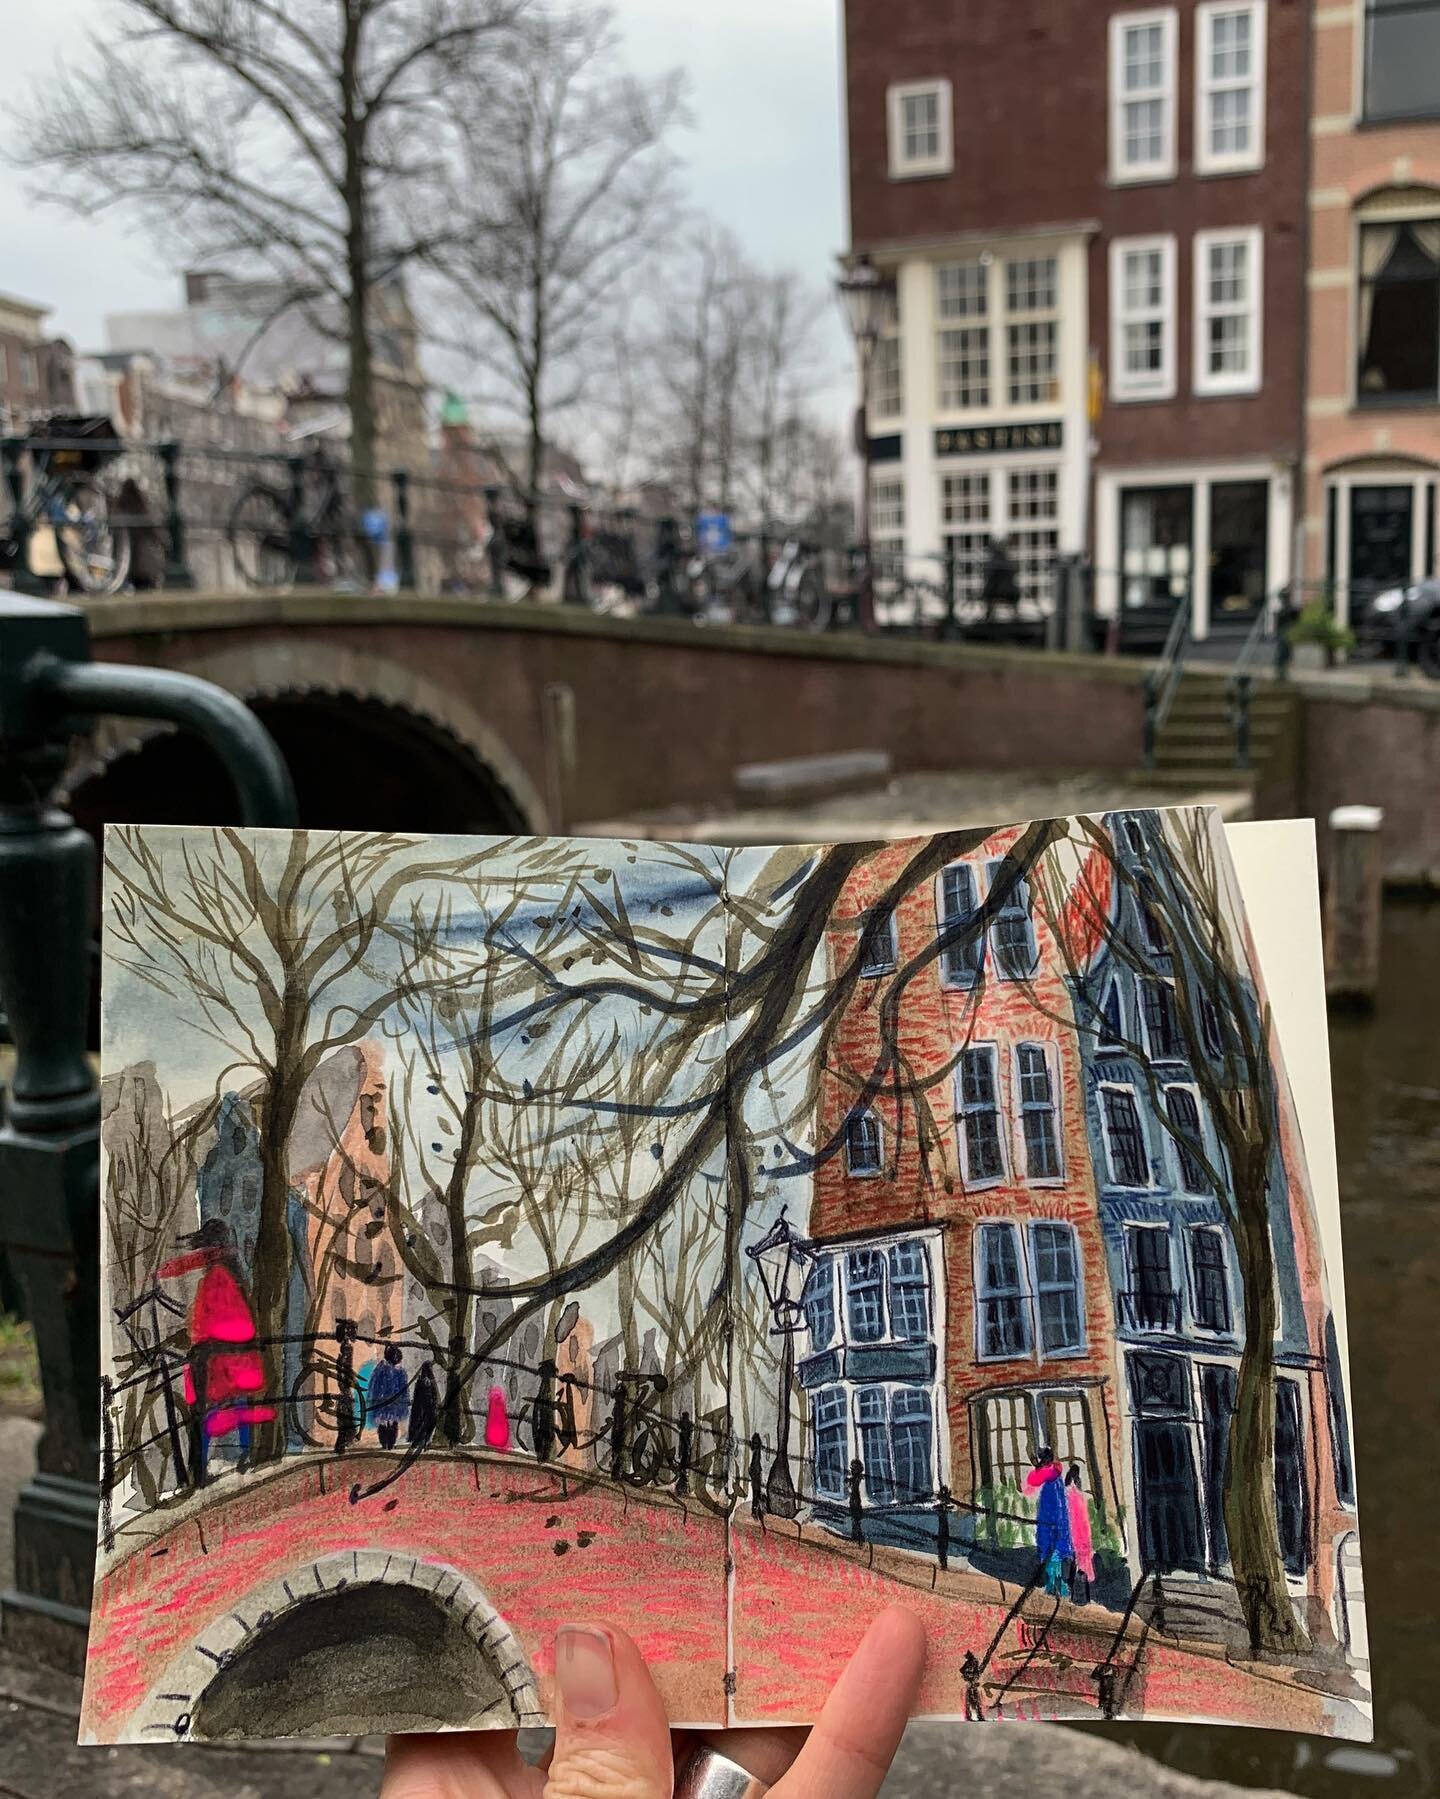 Such a wonderfully relaxing Sunday wandering the peaceful backstreets of Amsterdam. I love the bones of this city - the impossible angles of the tall thin buildings, the canals and the plant life that feels so abundant right in the city&rsquo;s heart